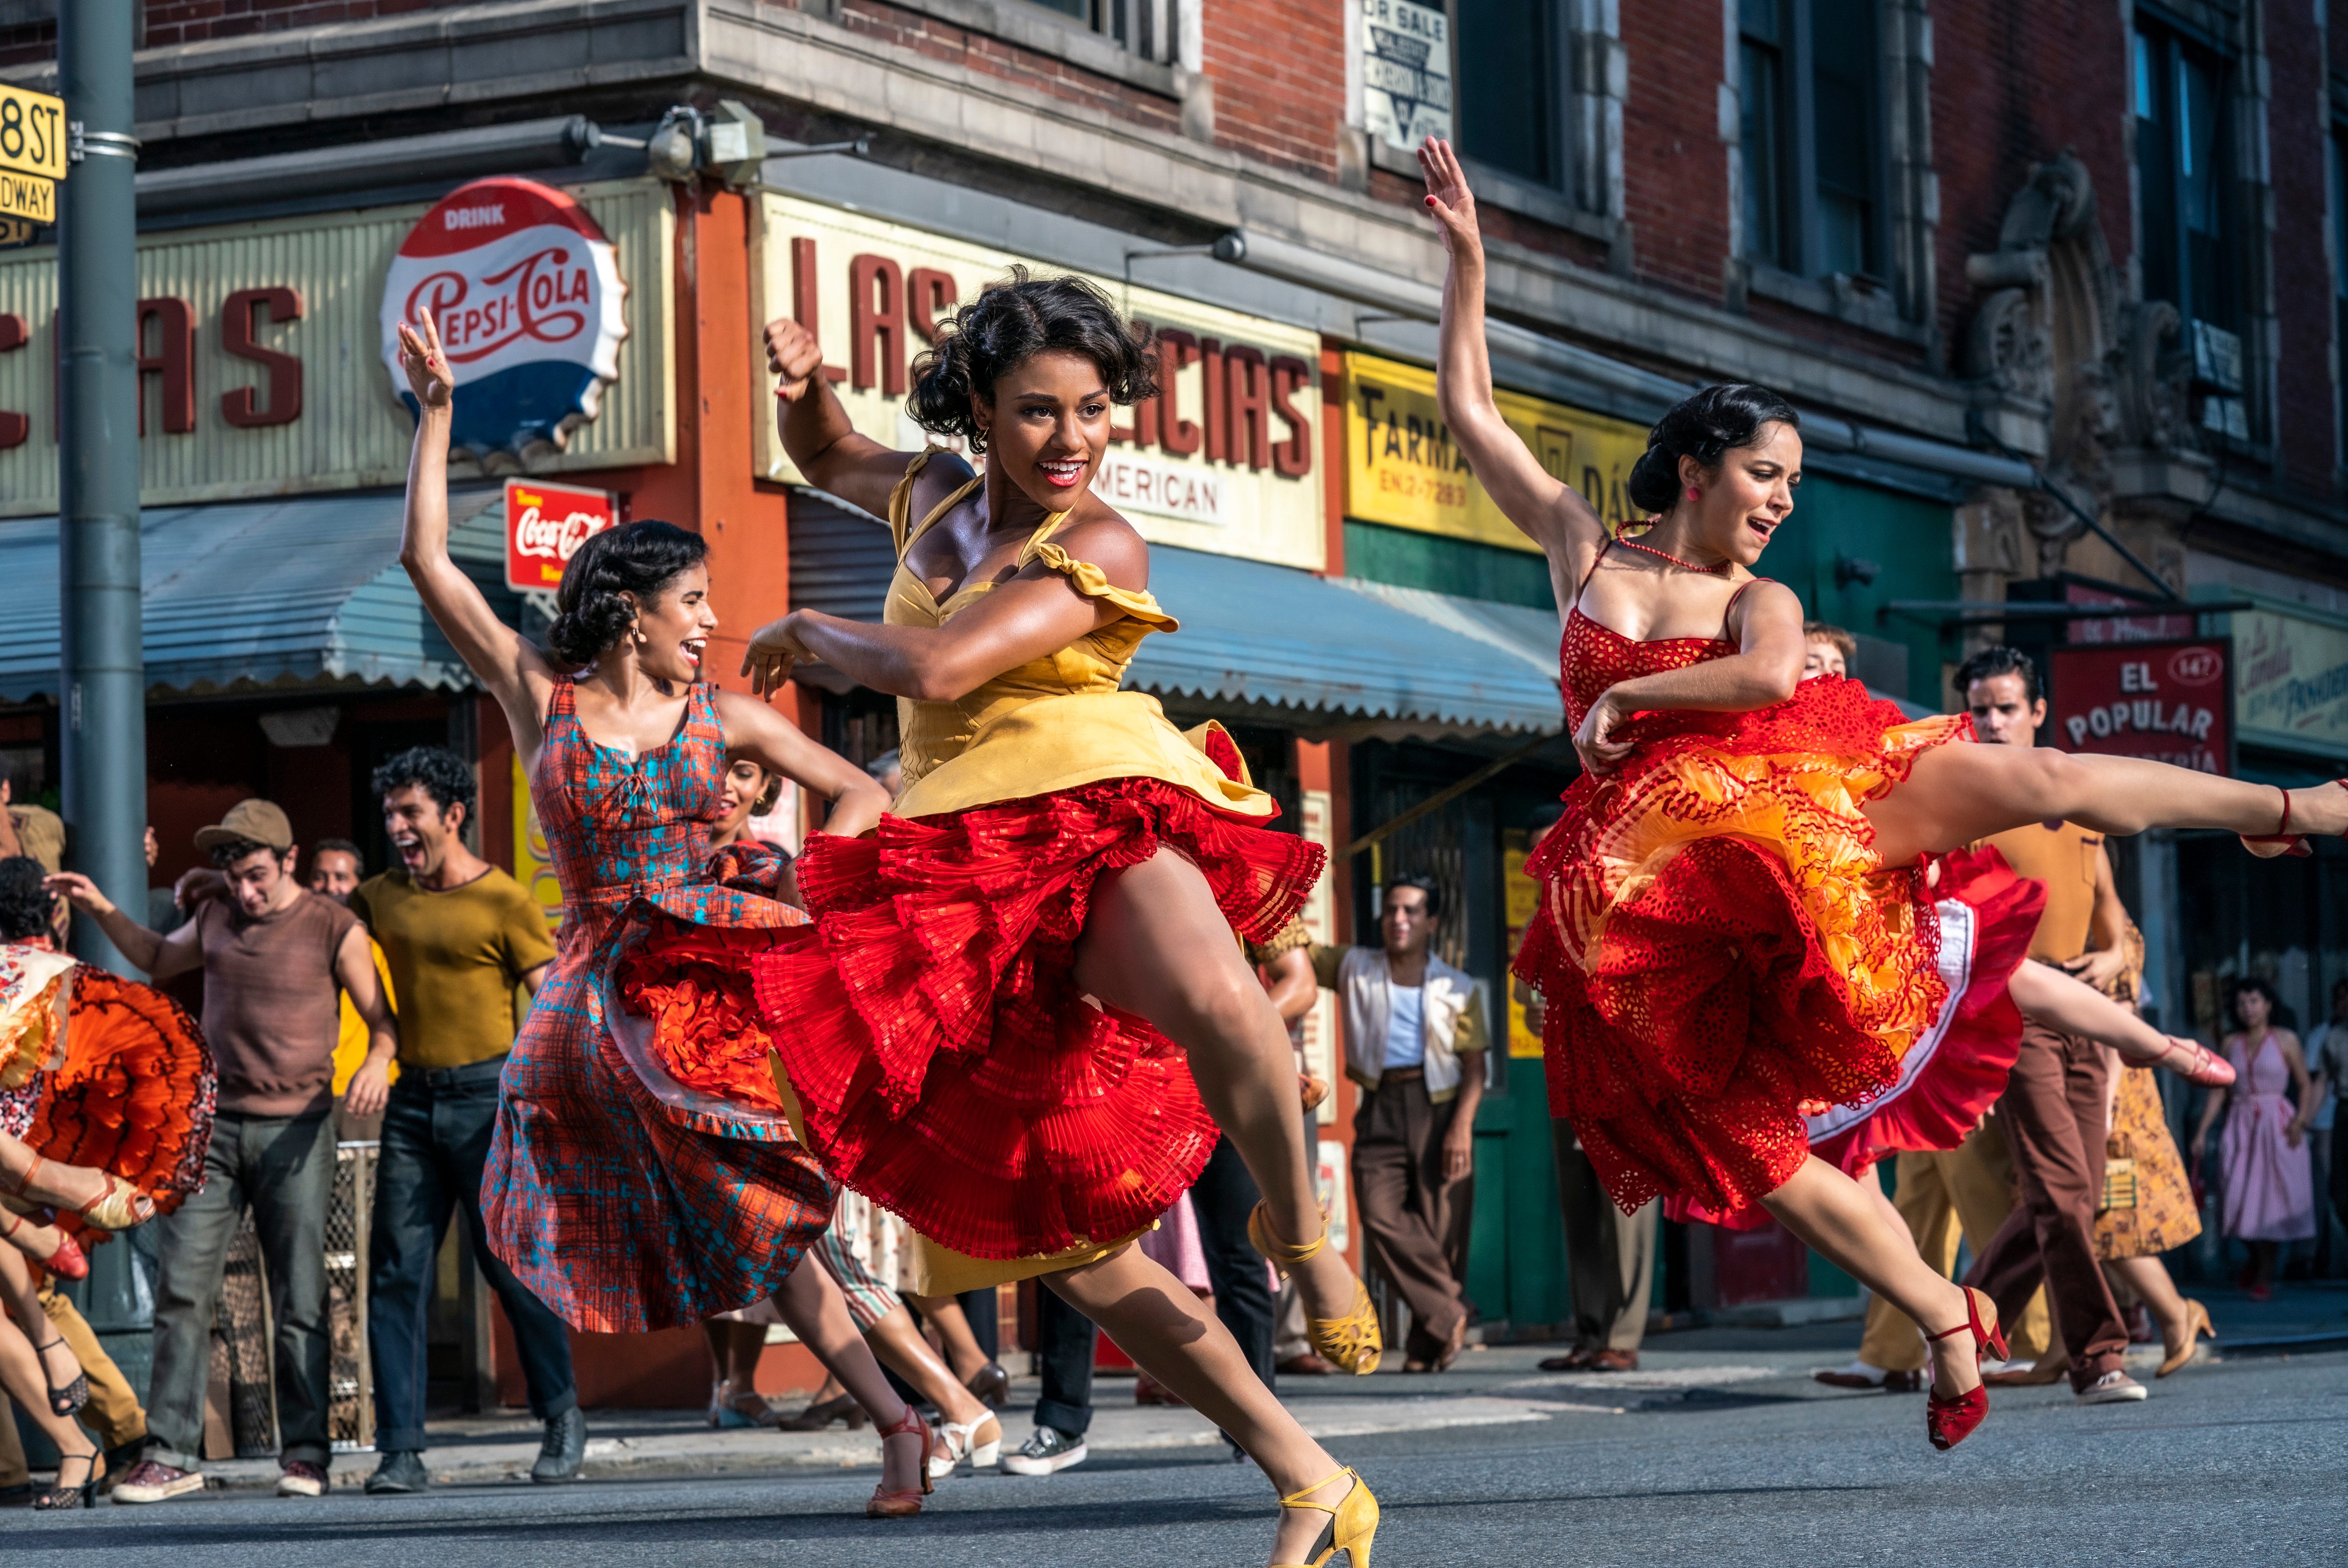 Review: Steven Spielberg doesn't disappoint with his vibrant, revamped 'West Side Story'